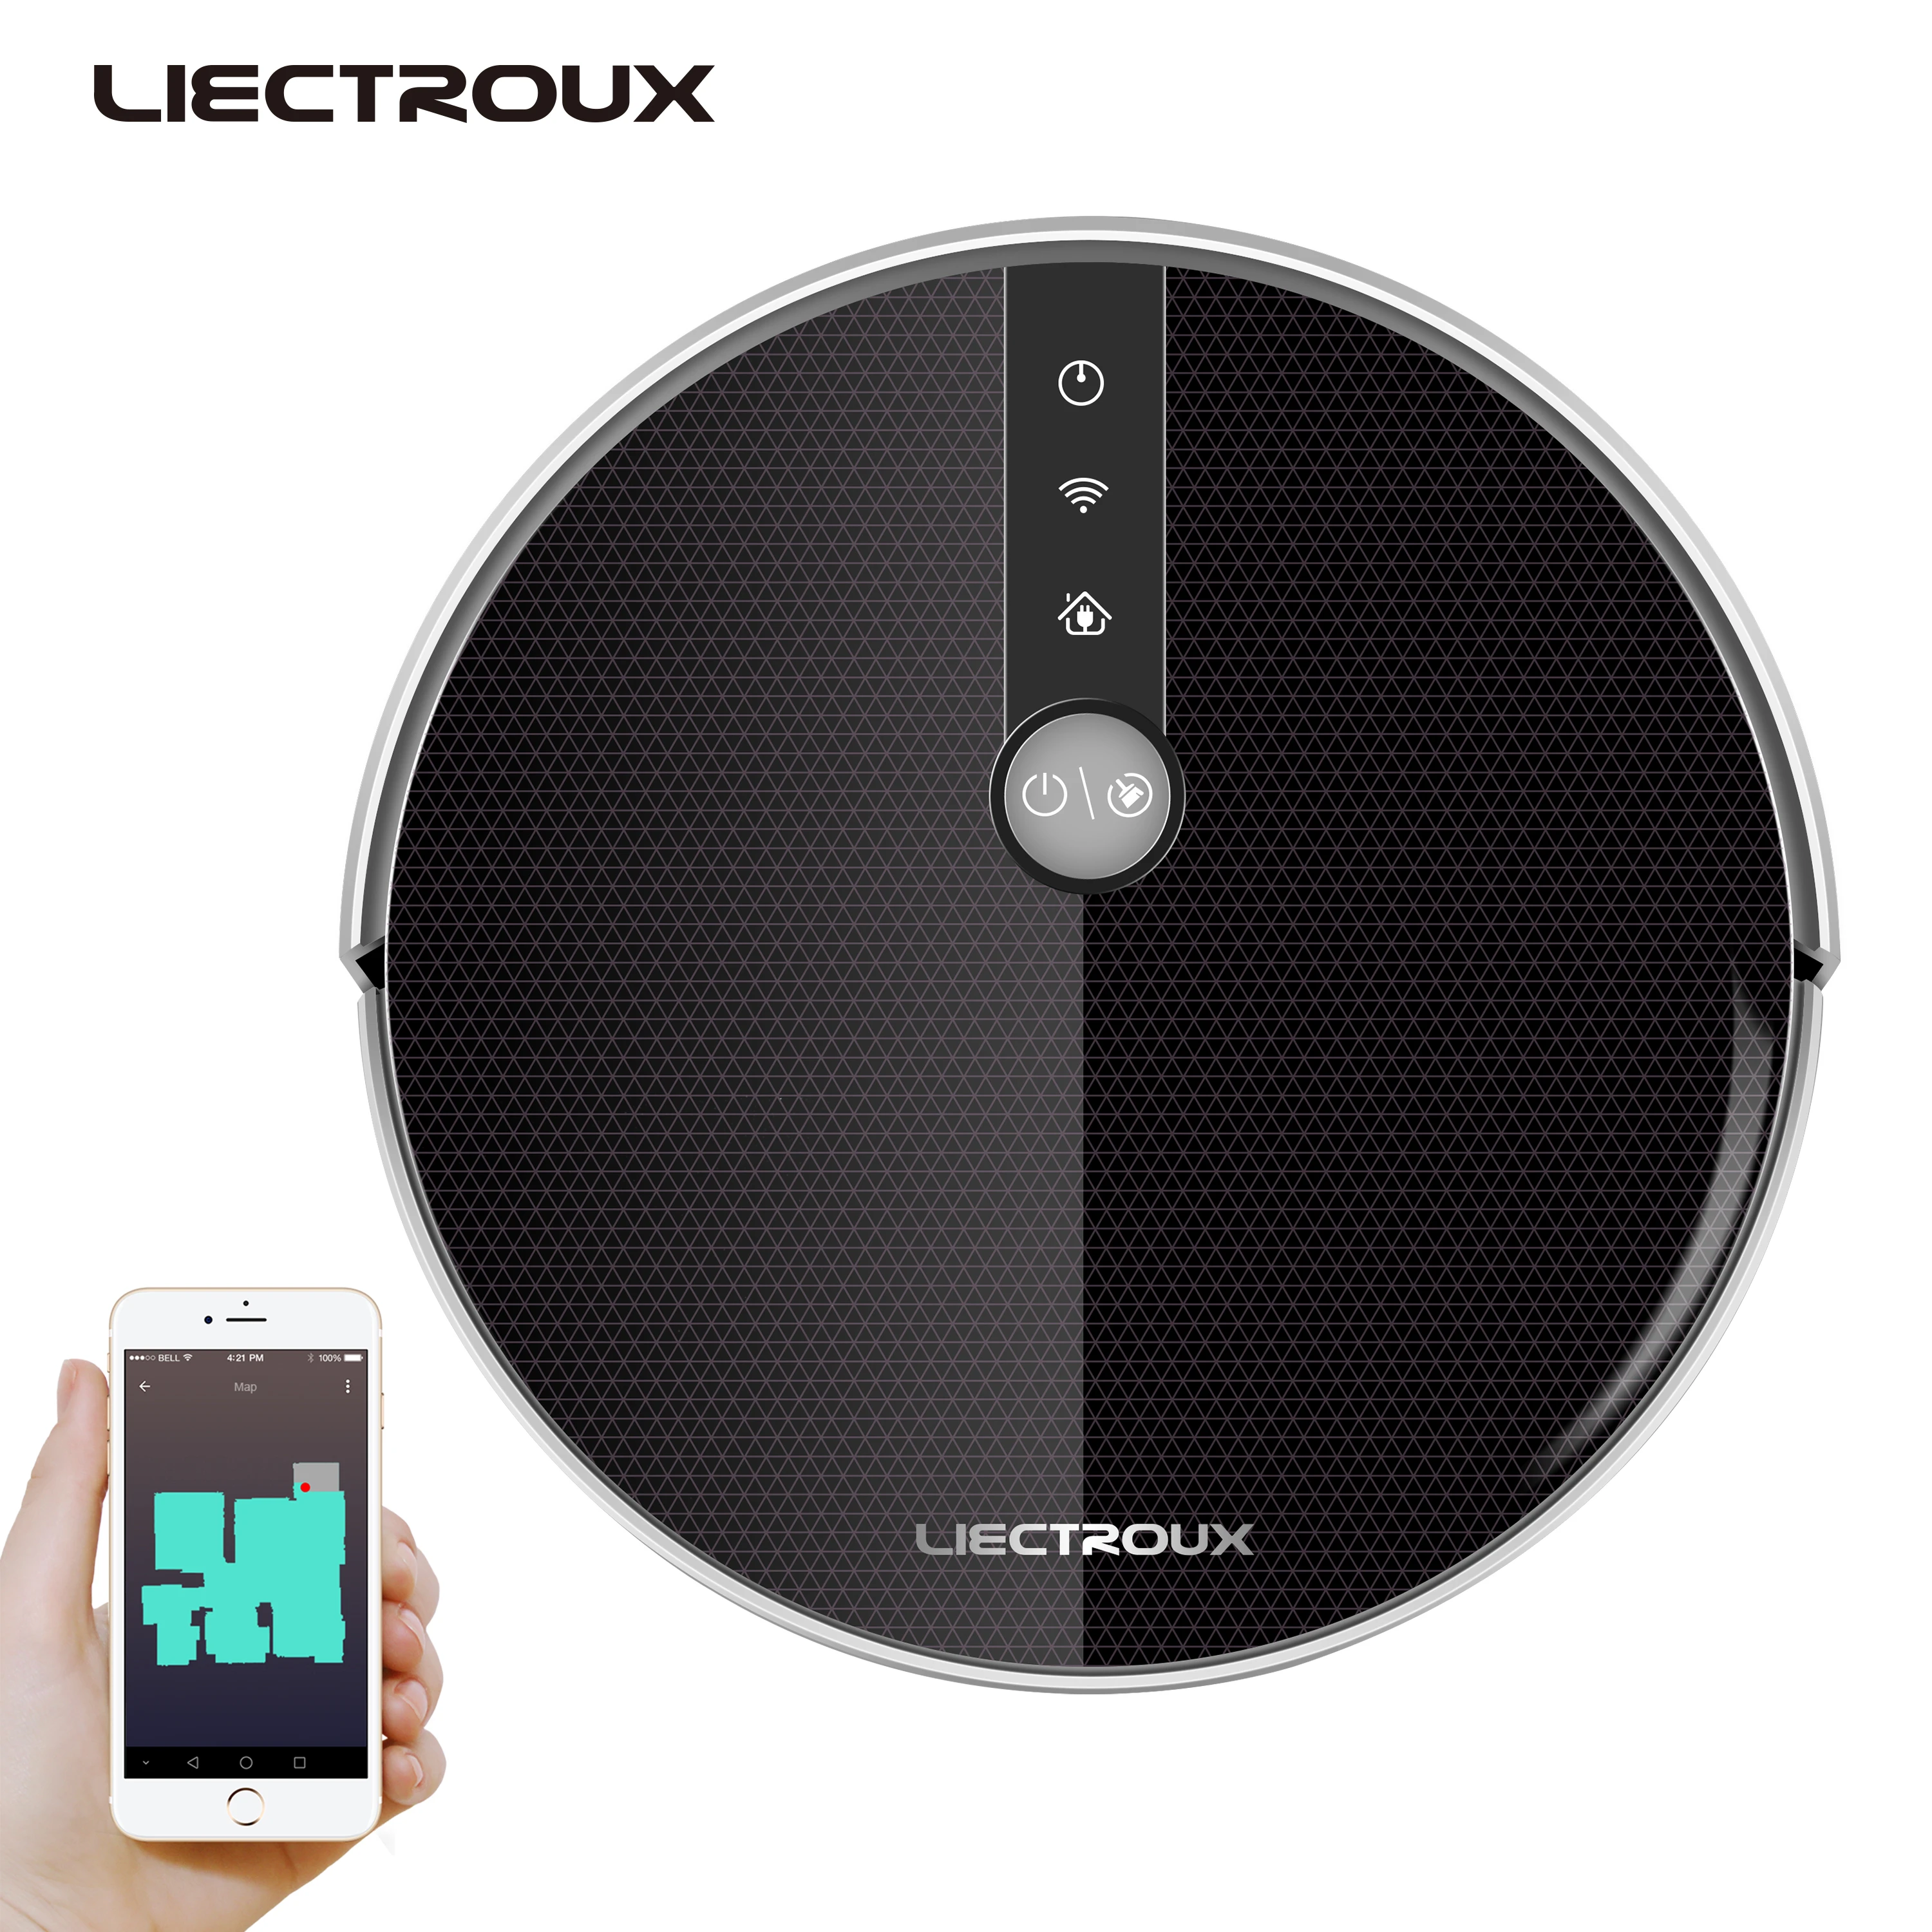 LIECTROUX C30B robot vacuum cleaner works with Amazon alexa and google assistant